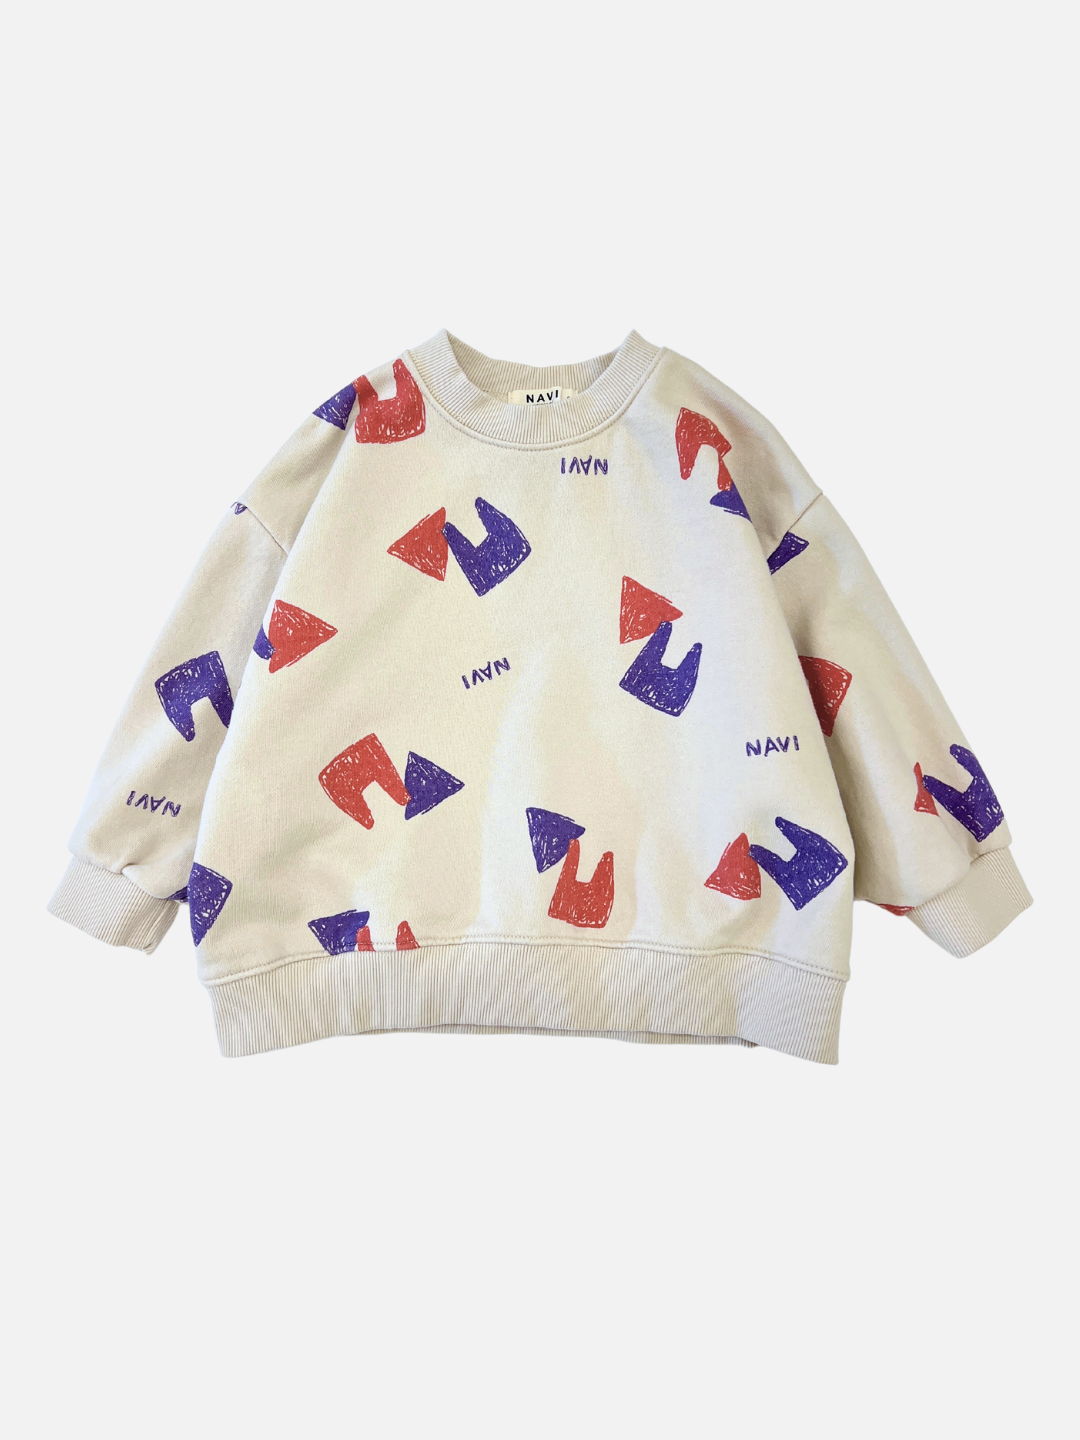 Oatmeal | Front view of kids beige crewneck sweatshirt with an all over pattern of red and purple shapes and the brand name Navi.